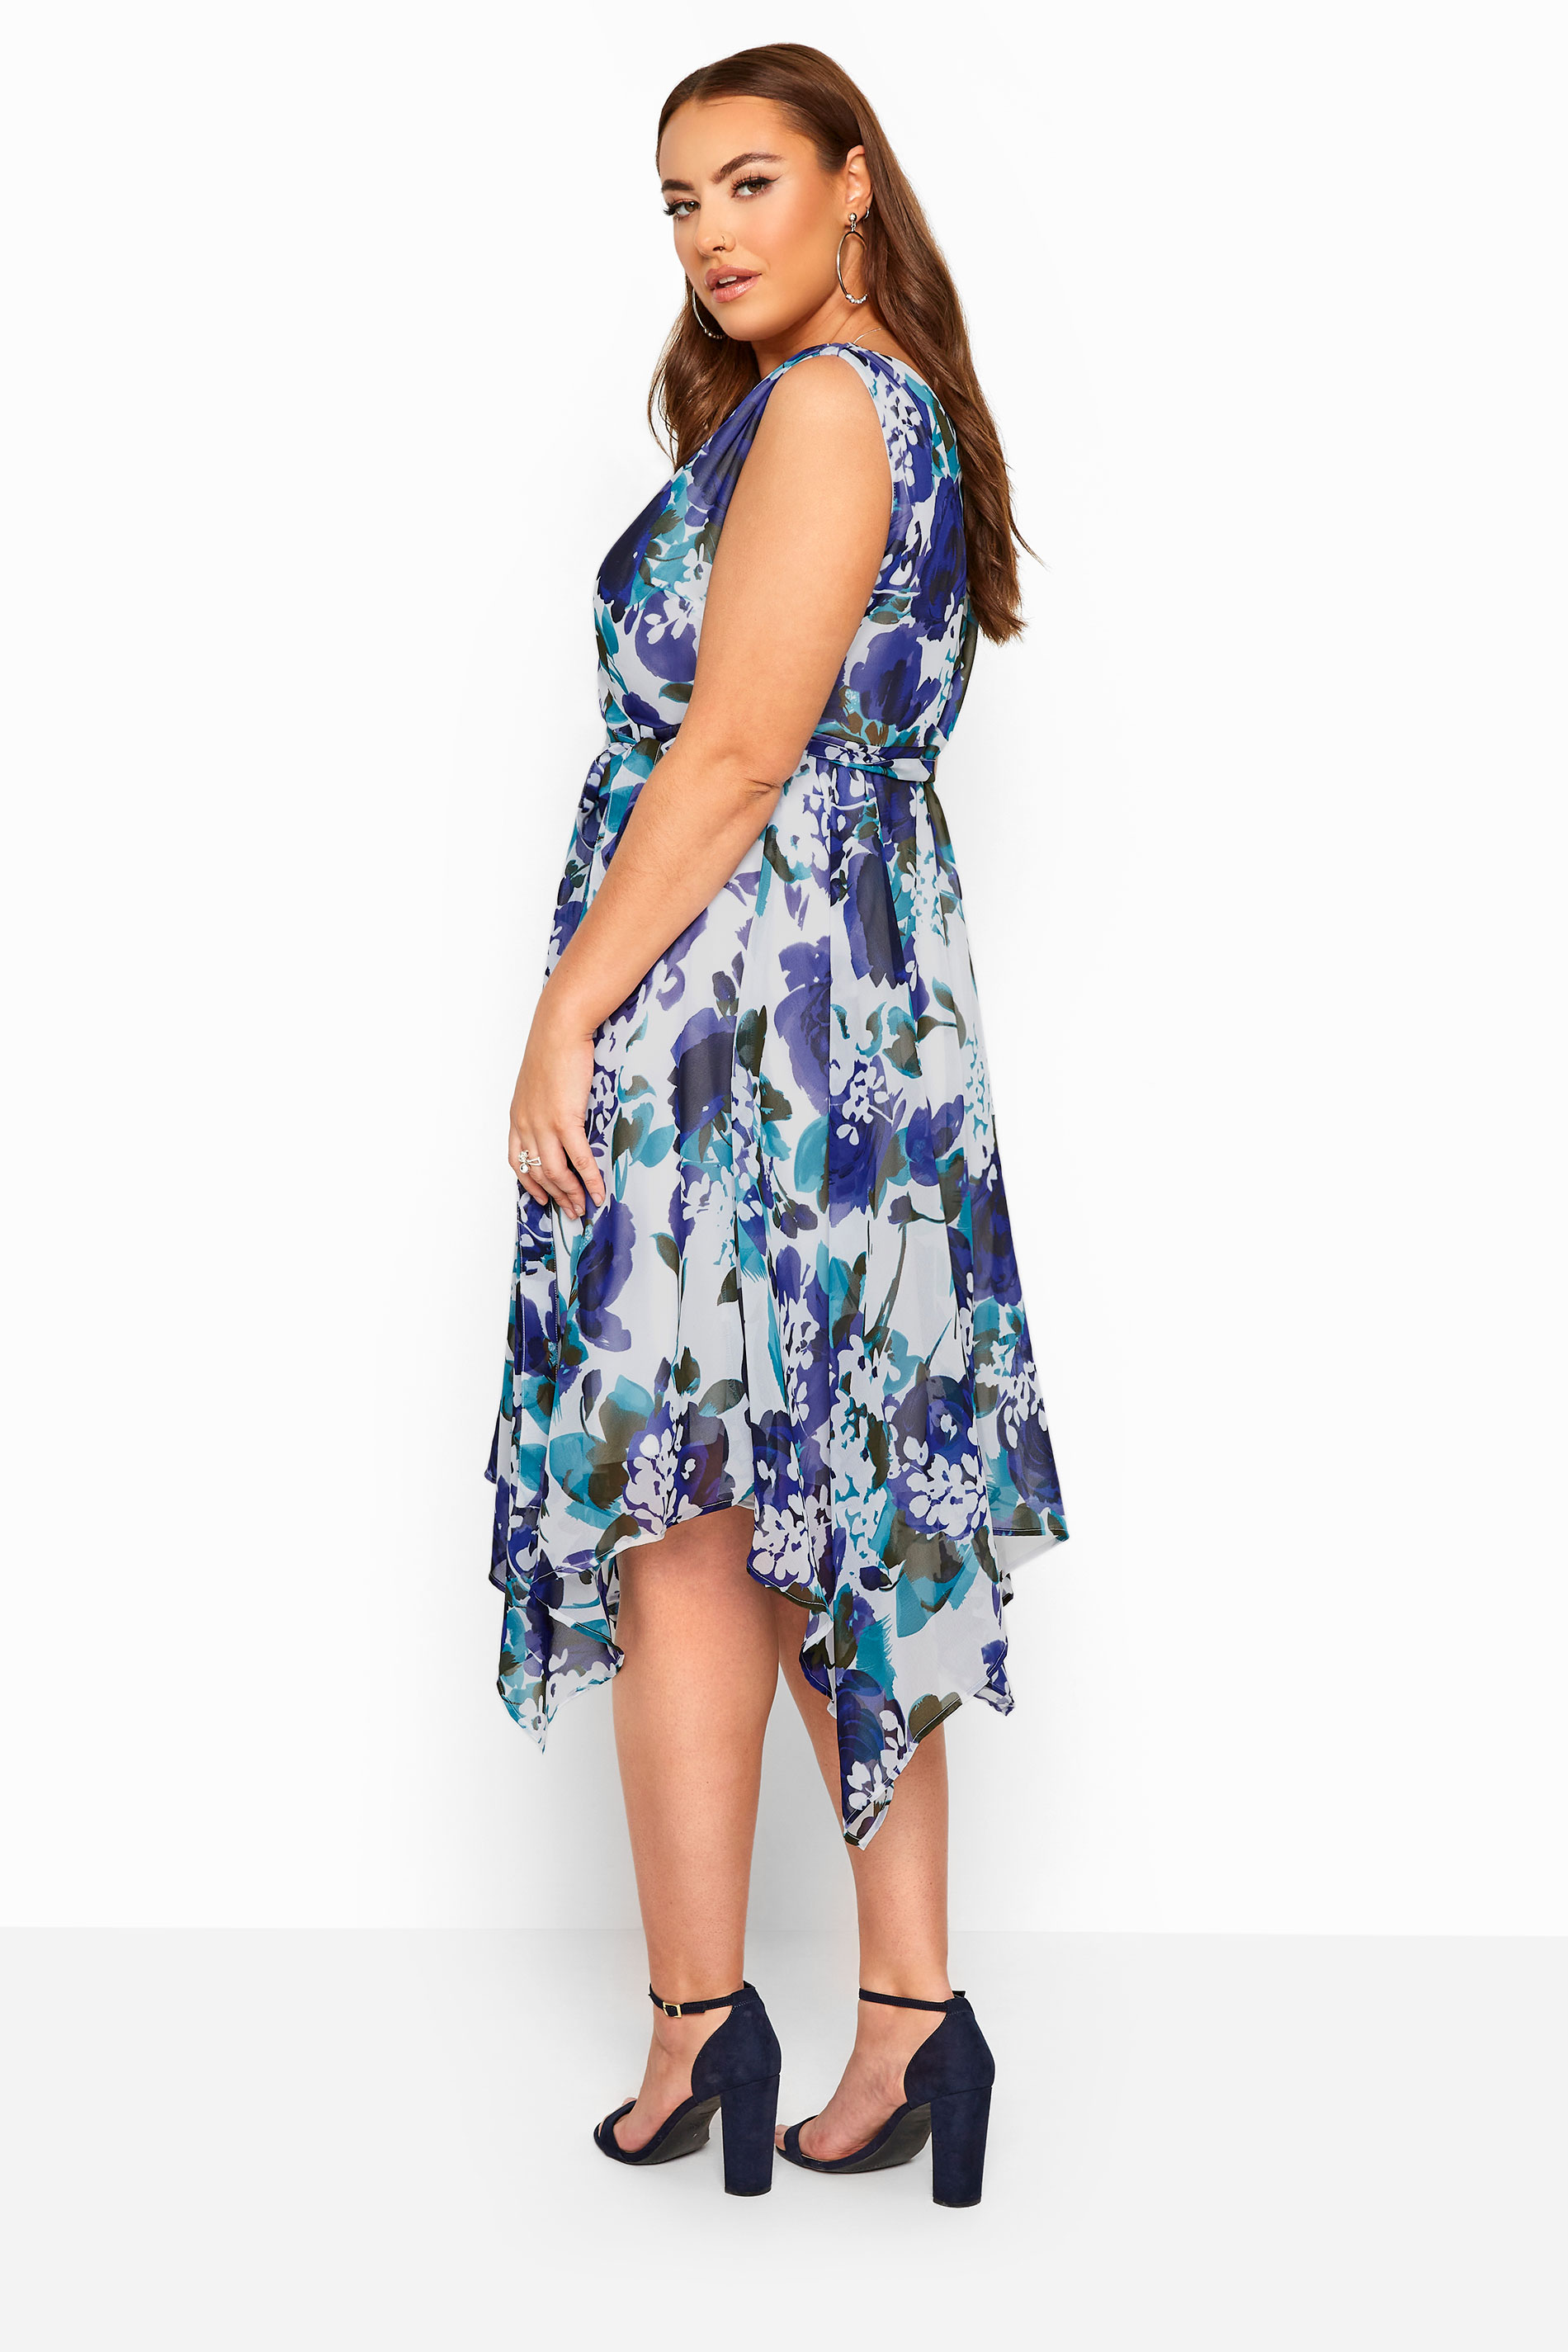 YOURS LONDON Blue Floral Hanky Hem Dress | Yours Clothing